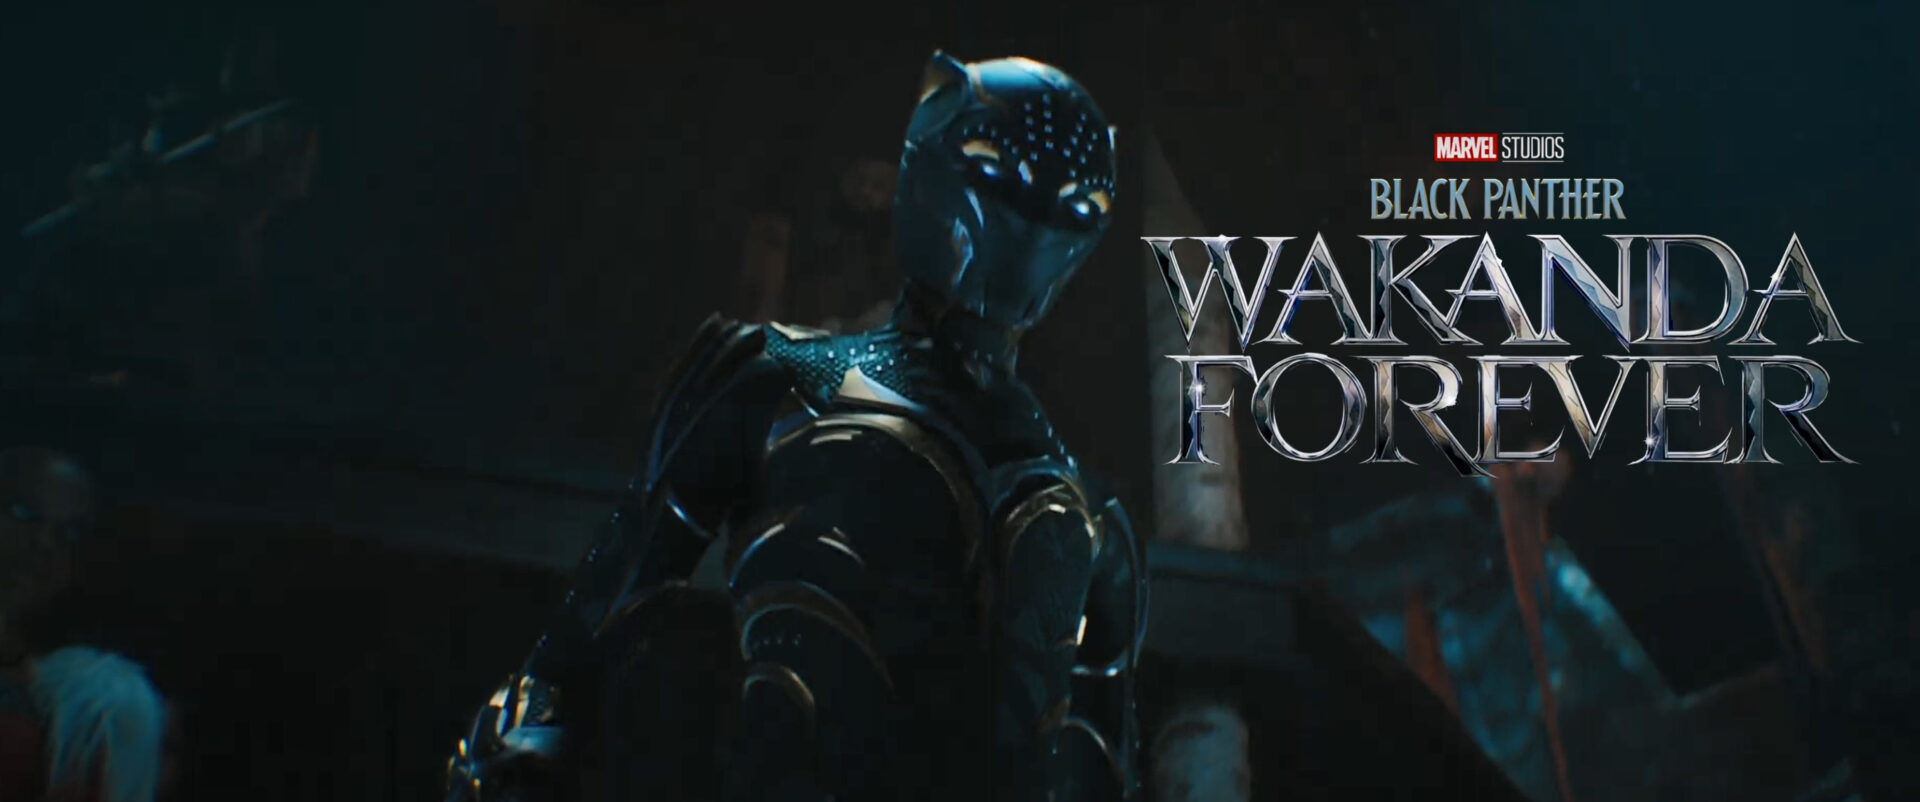 black panther wakanda forever theatrical trailer1